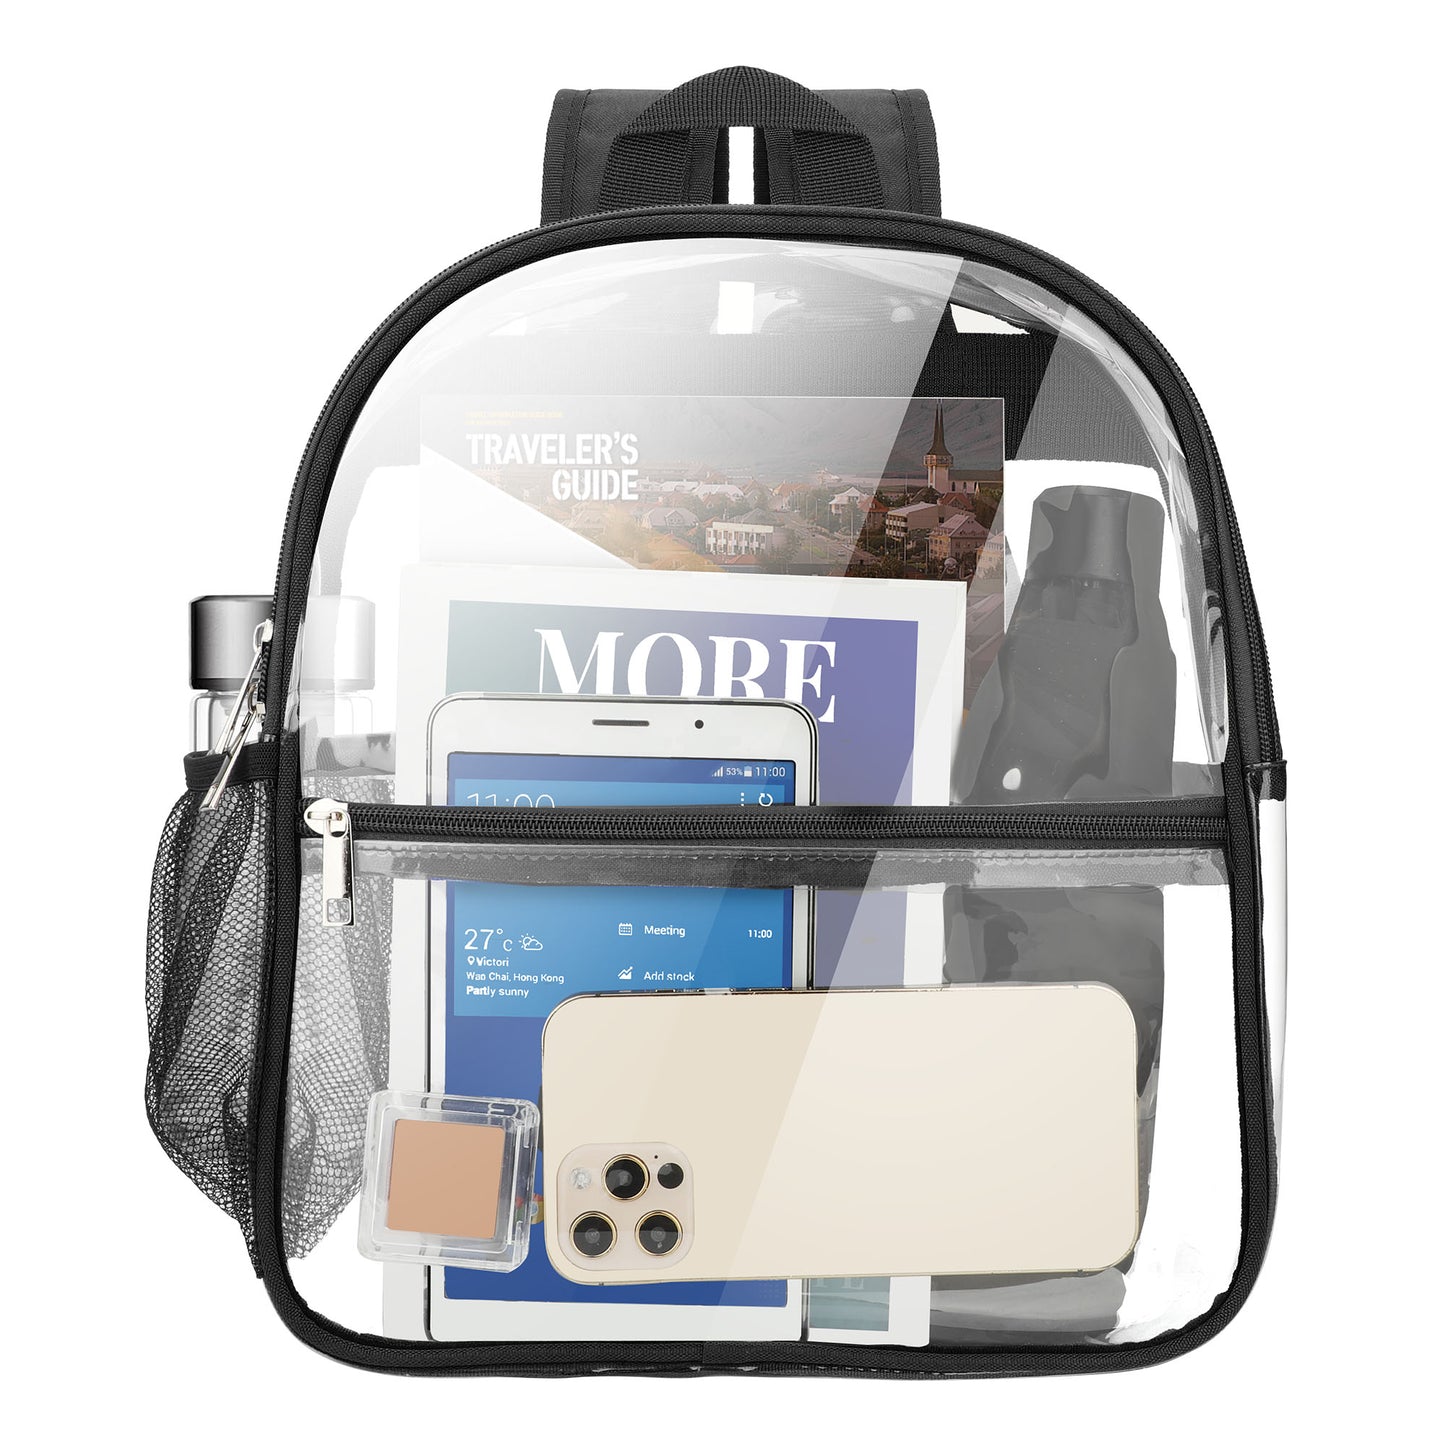 Transparent Clear Backpack - Water-Resistant PVC, Sturdy Shoulder Straps, Security Check Friendly